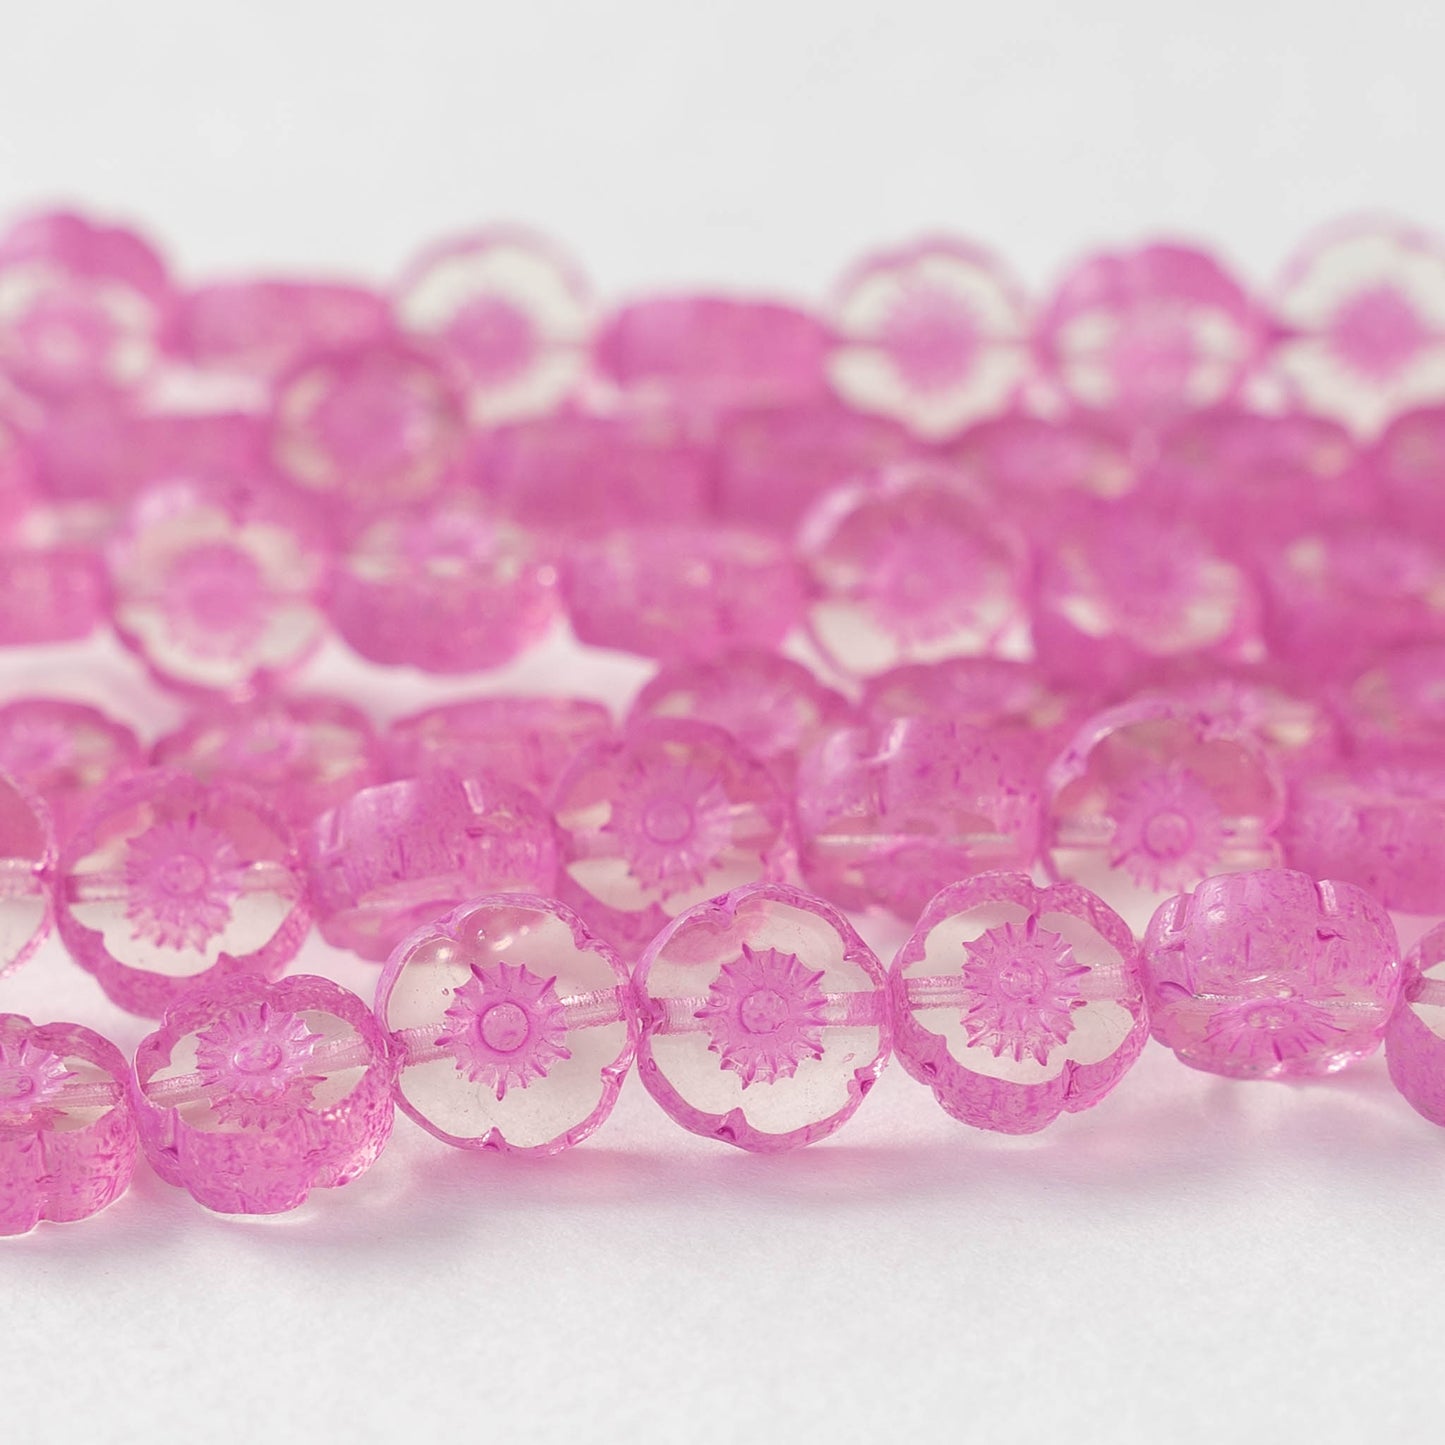 8mm Flower Beads - Crystal with Pink -20 Beads